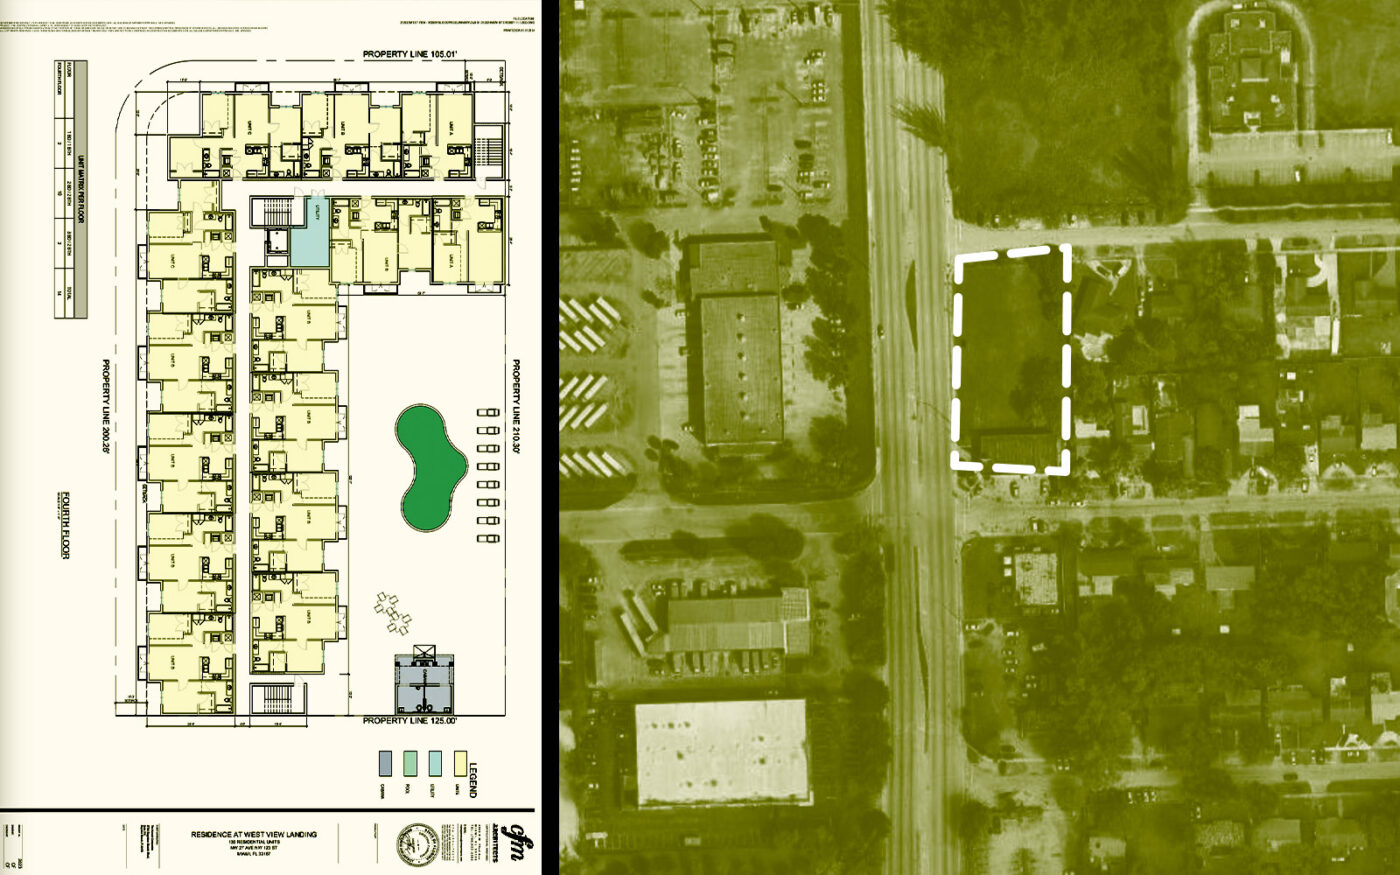 Schematics & aerial view of proposed Live Local Act project (Google Maps, CFM Architects, The NuRock Companies)